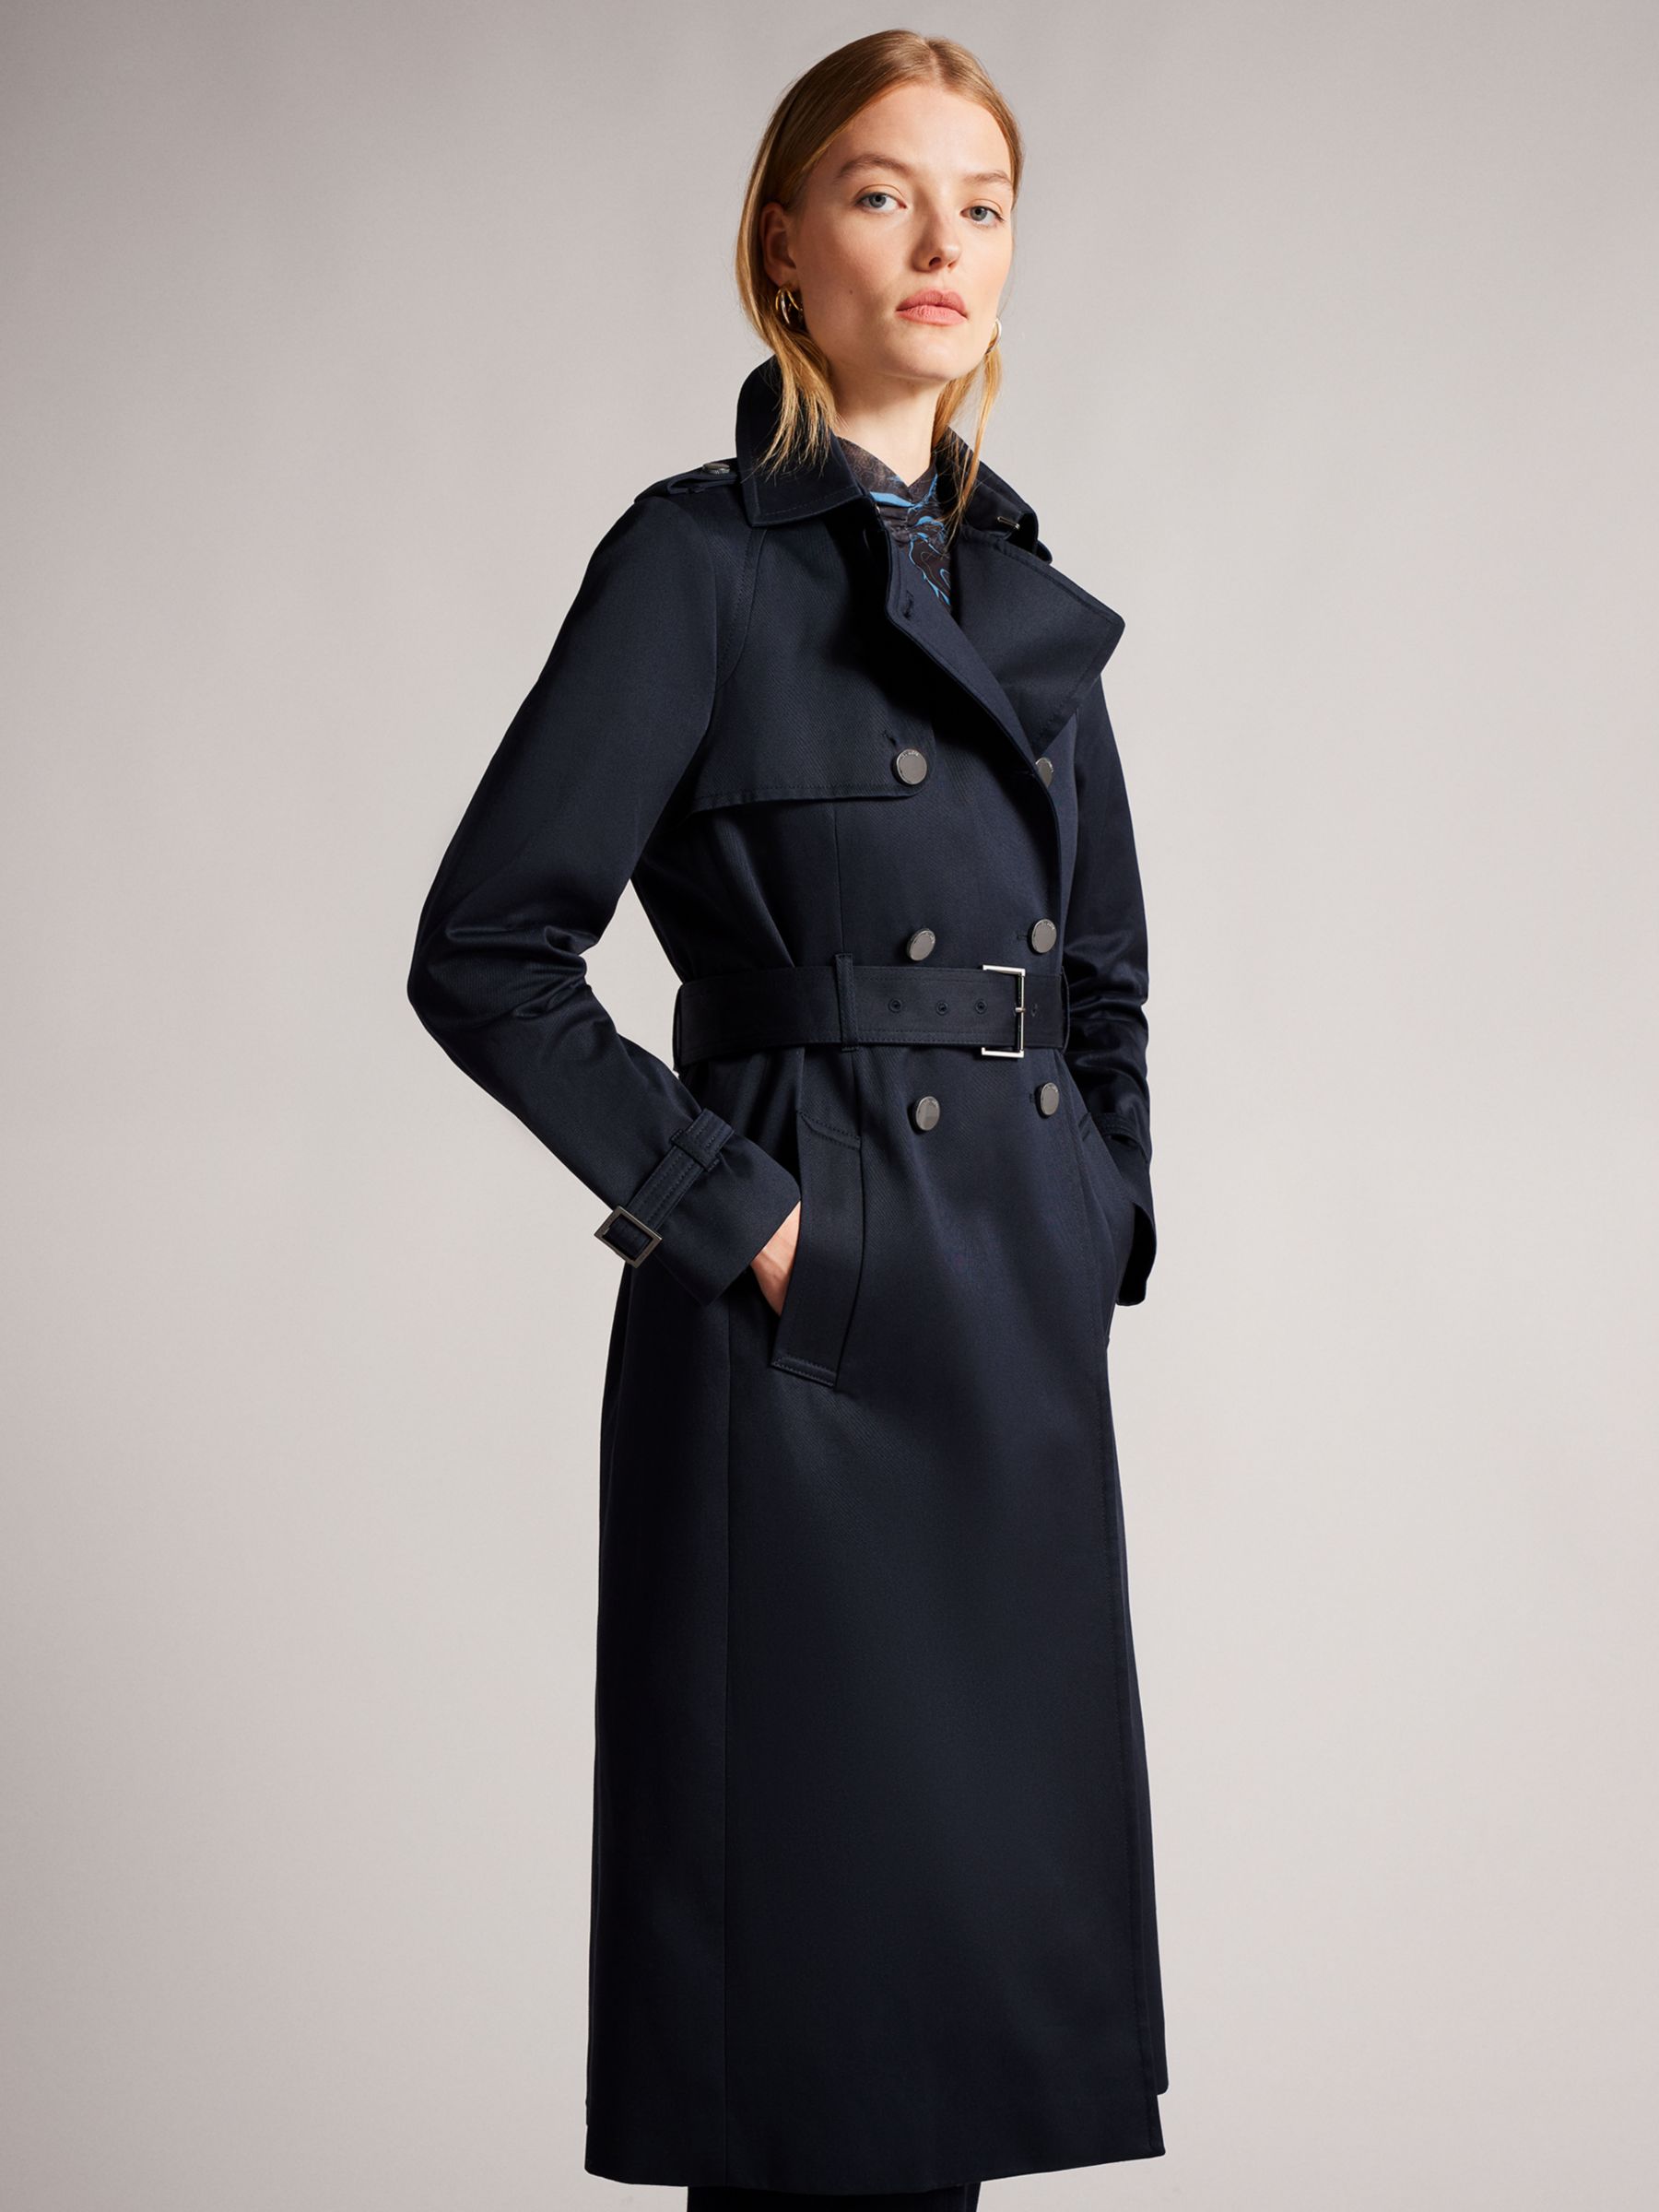 Ted Baker Robbii Trench Coat, Navy